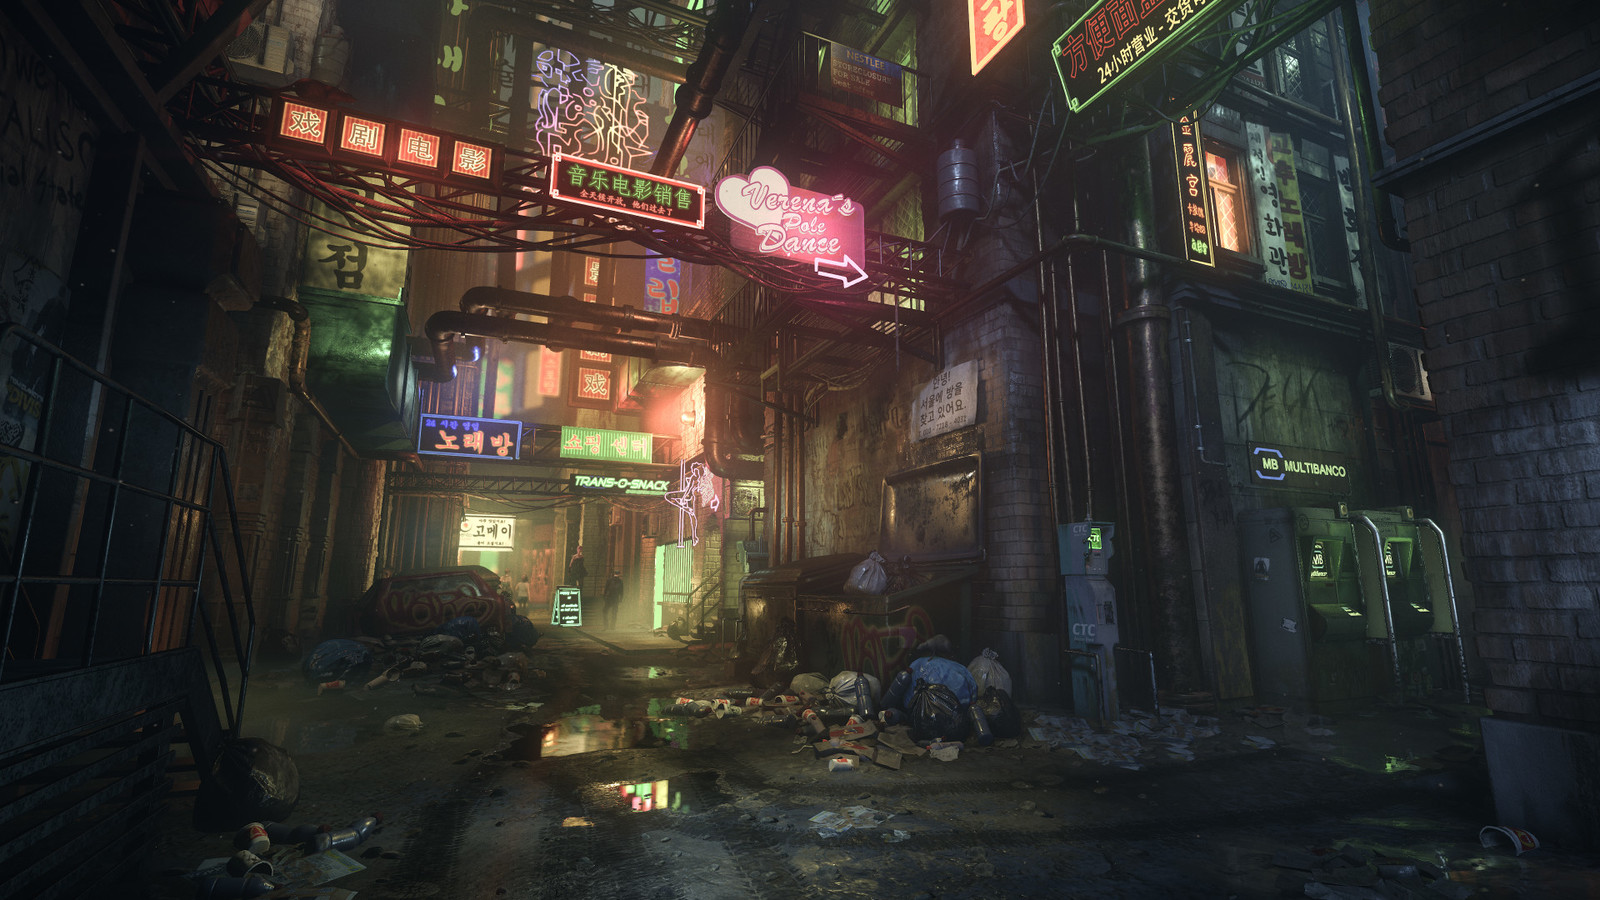 Honorable Mention, Beyond Human: Game Environment/Level Art